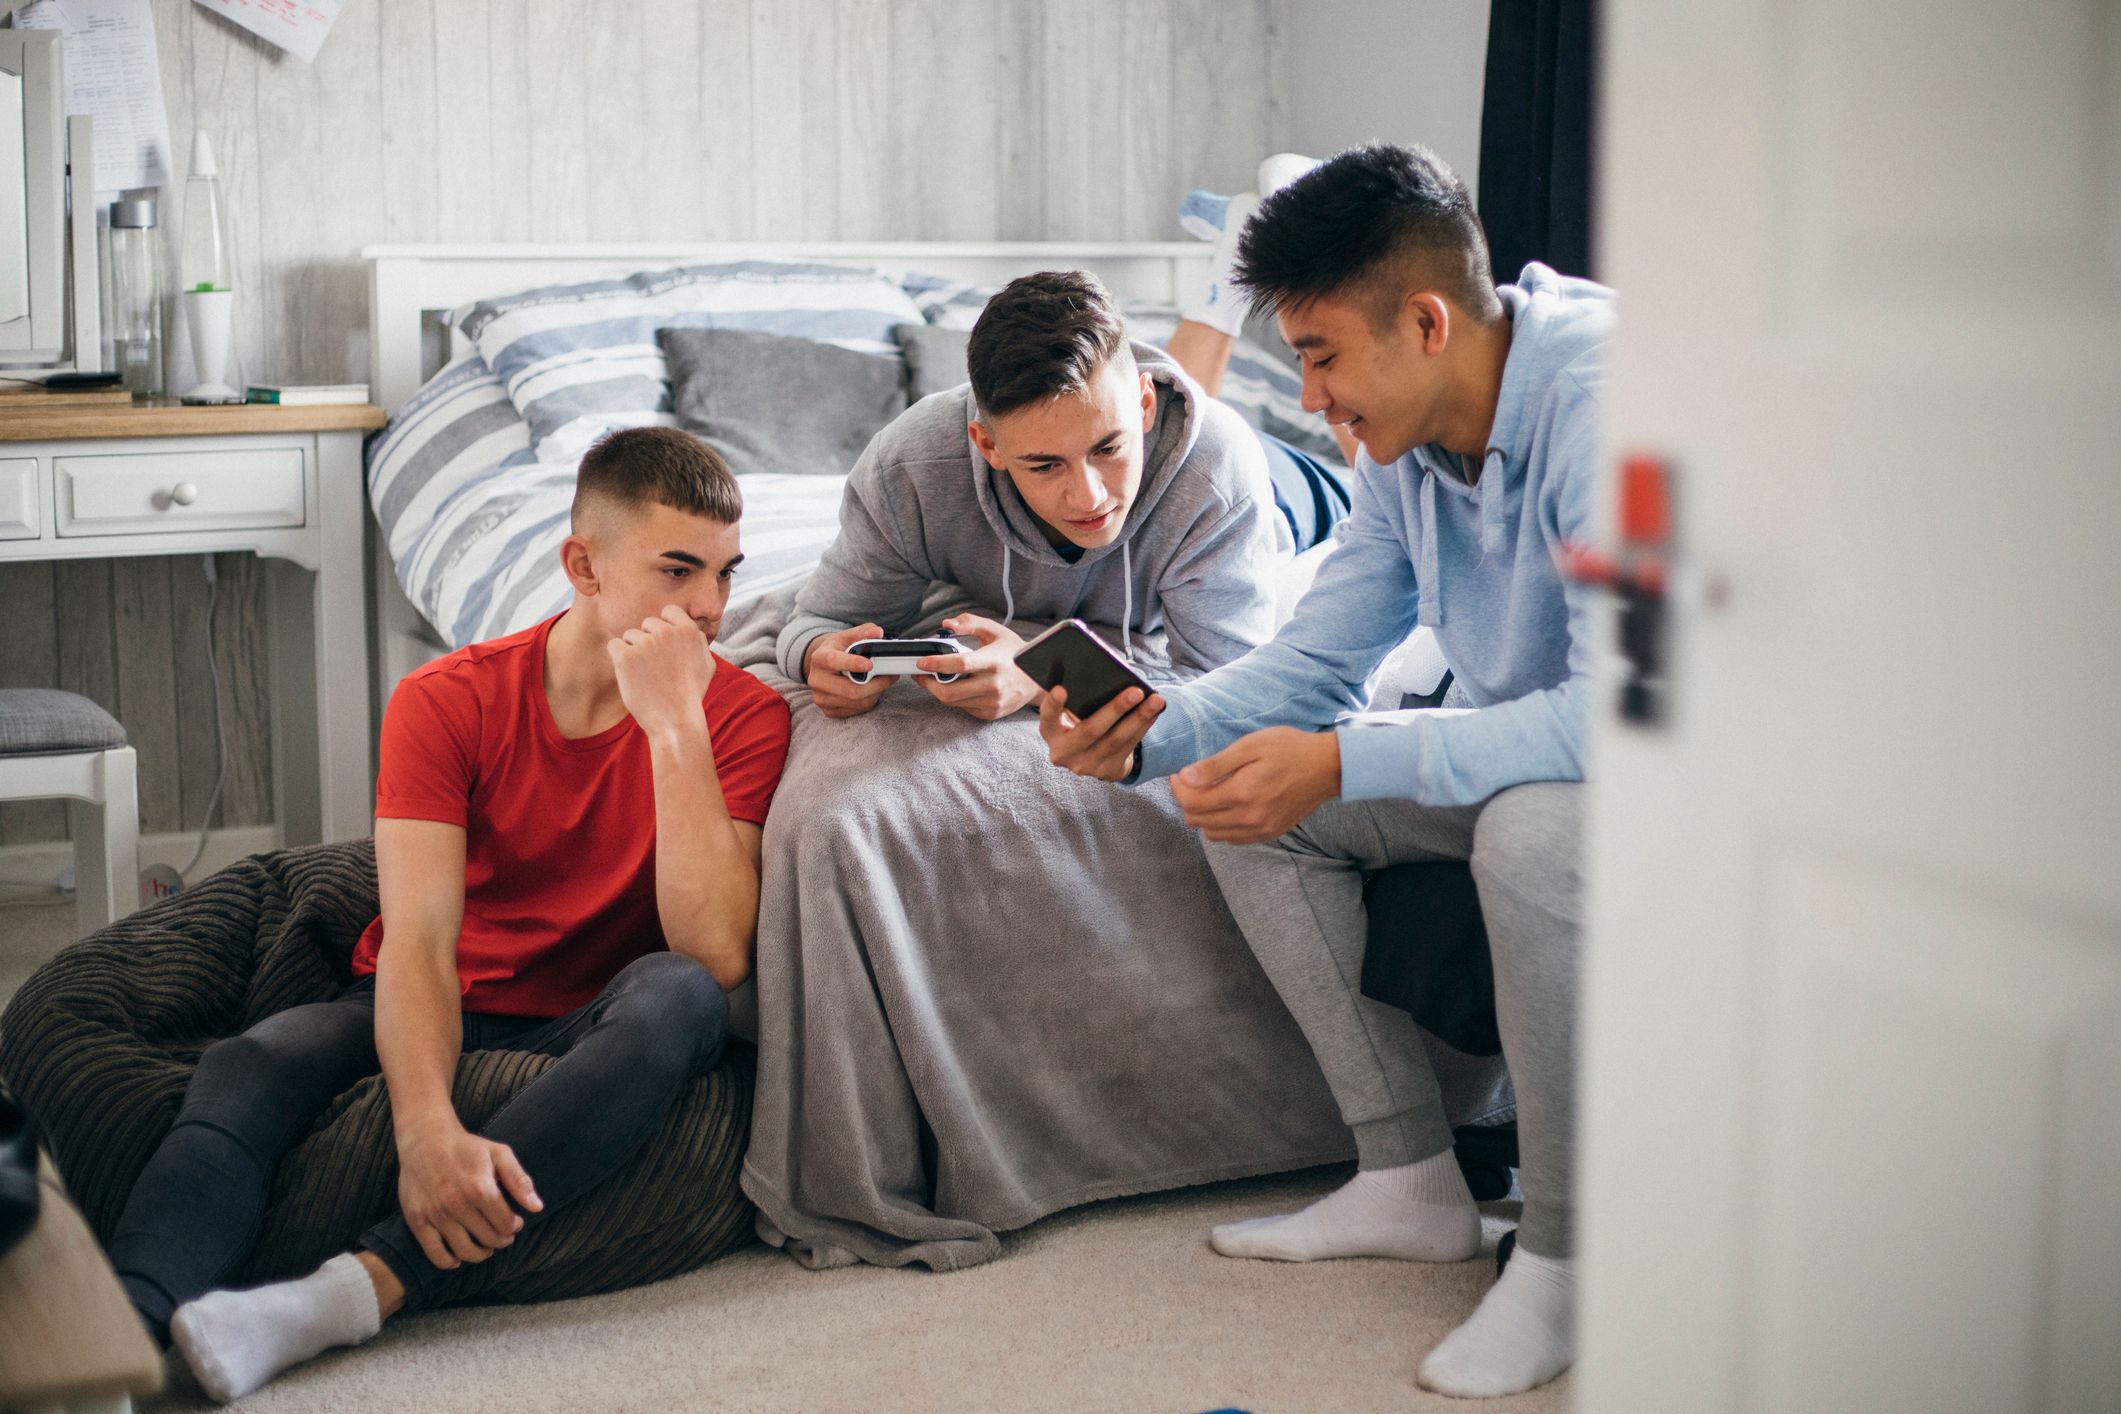 Teenagers looking at a message on a smartphone